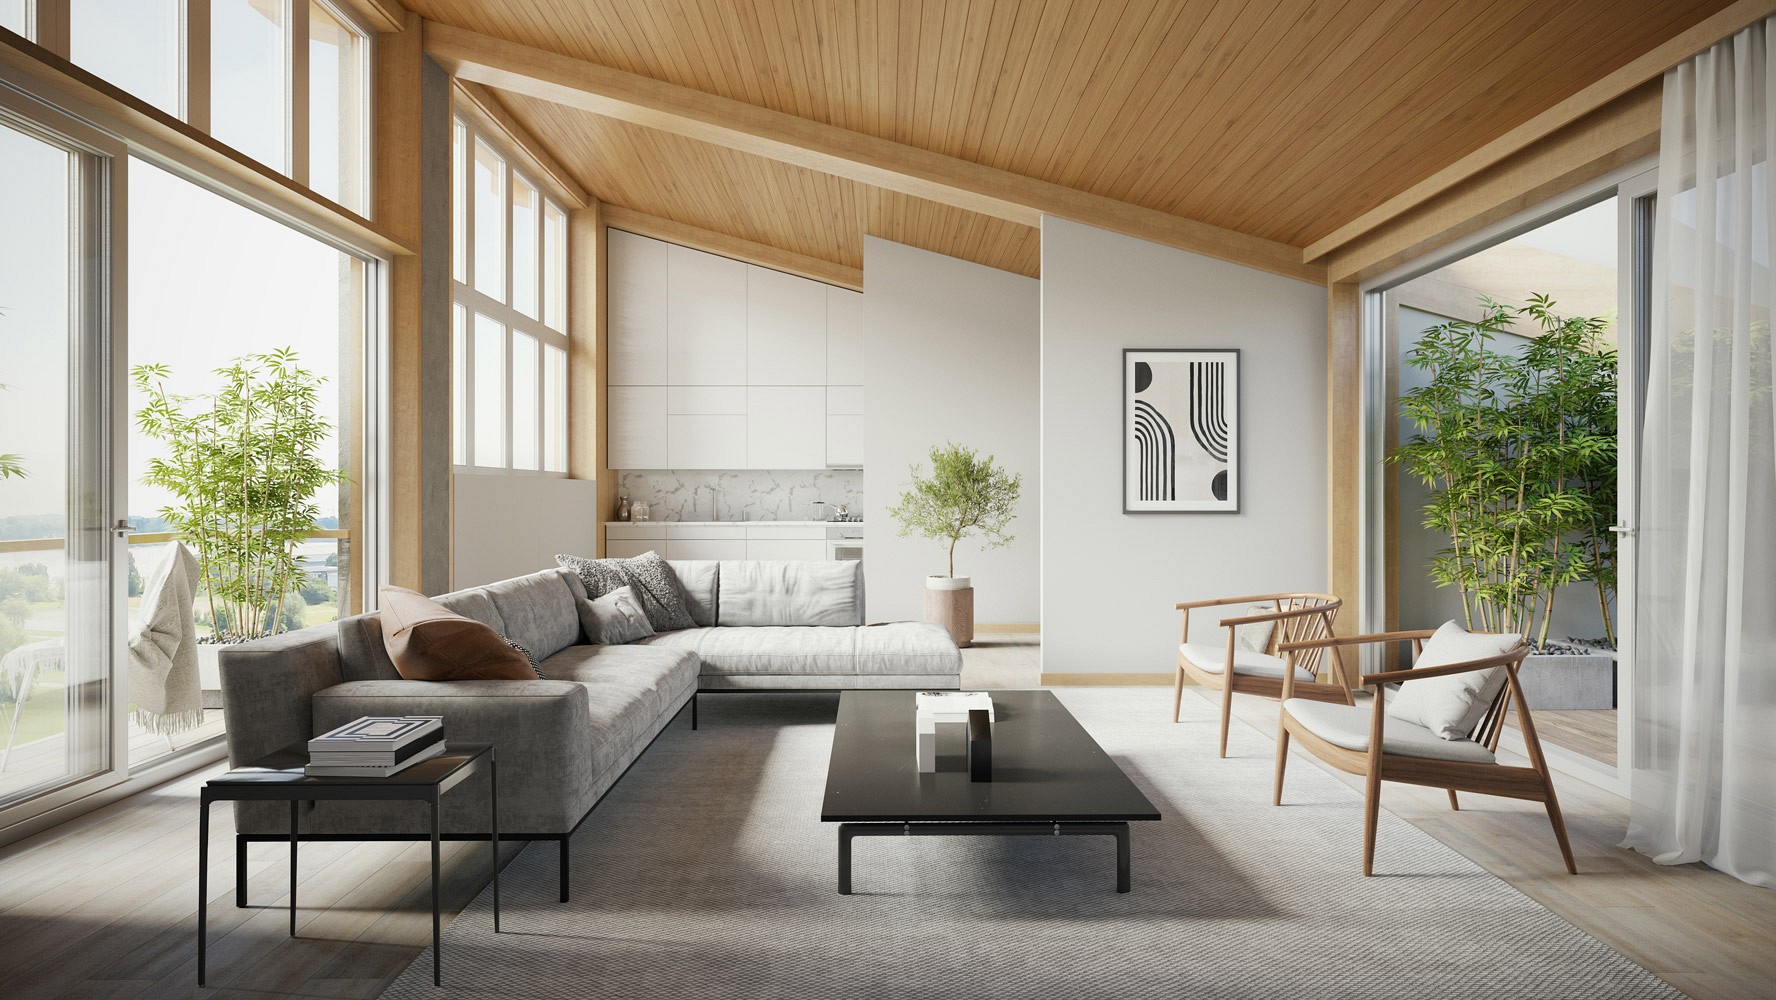 BAN, Nieuw Zuid: rendering of the interior of an appartment